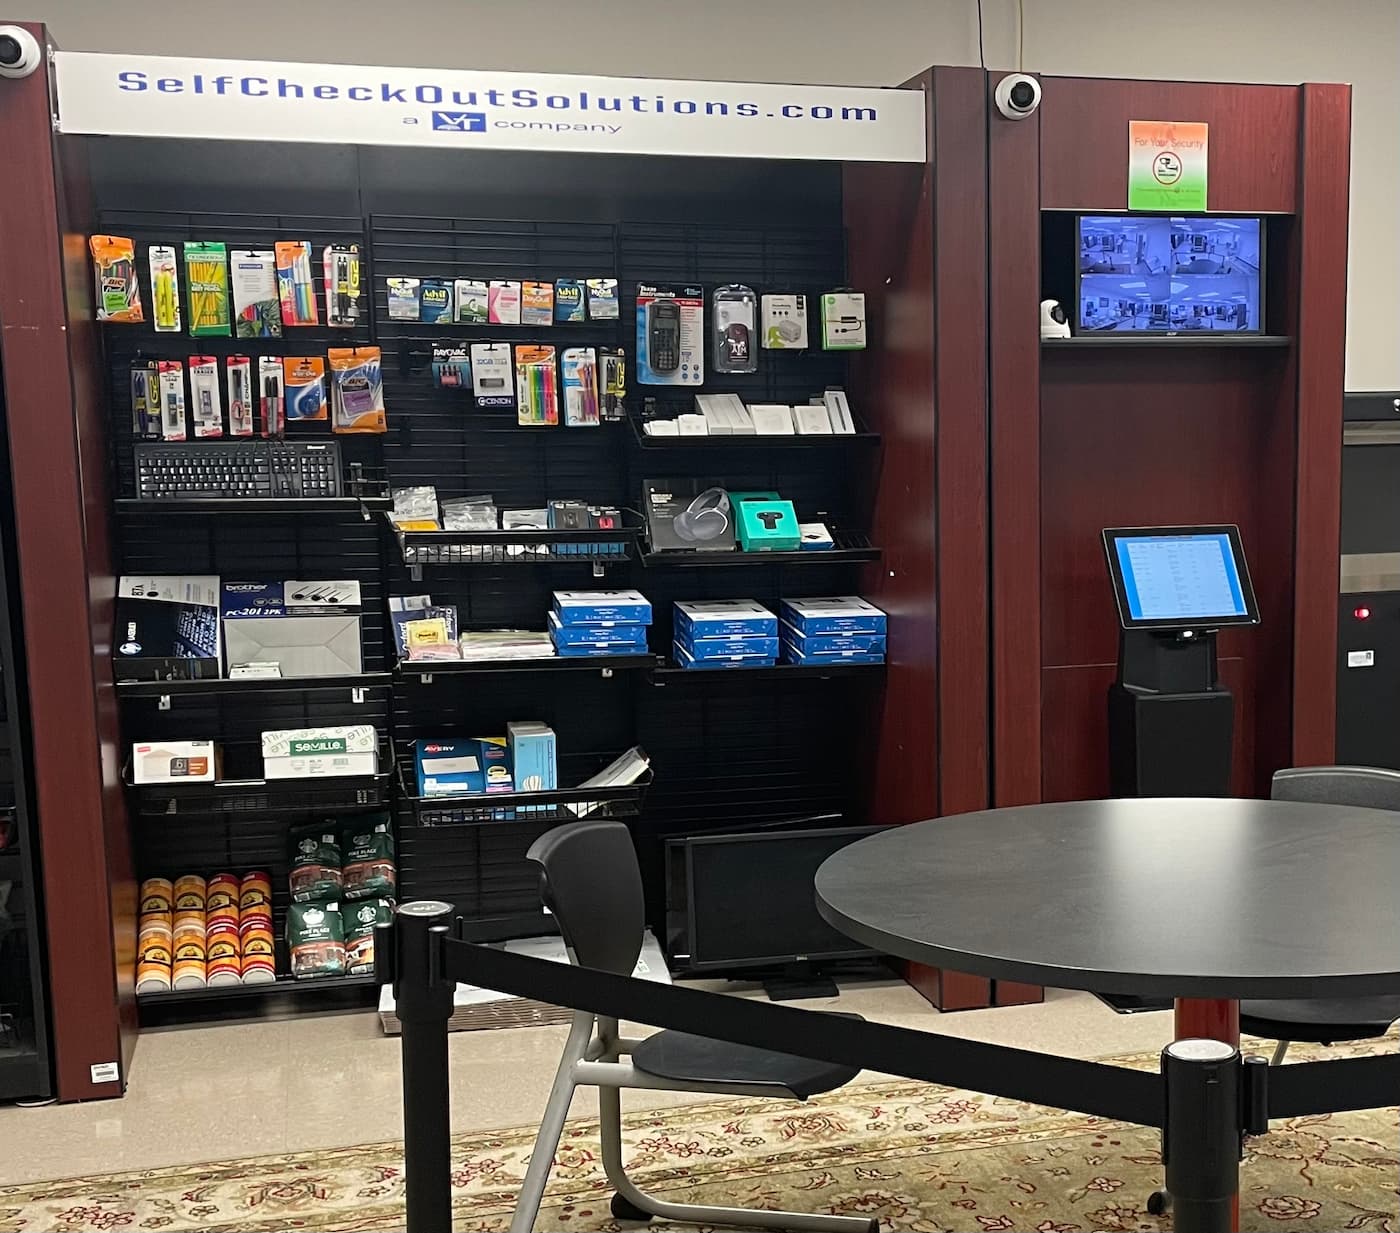 Example self-checkout area inside an employee breakroom